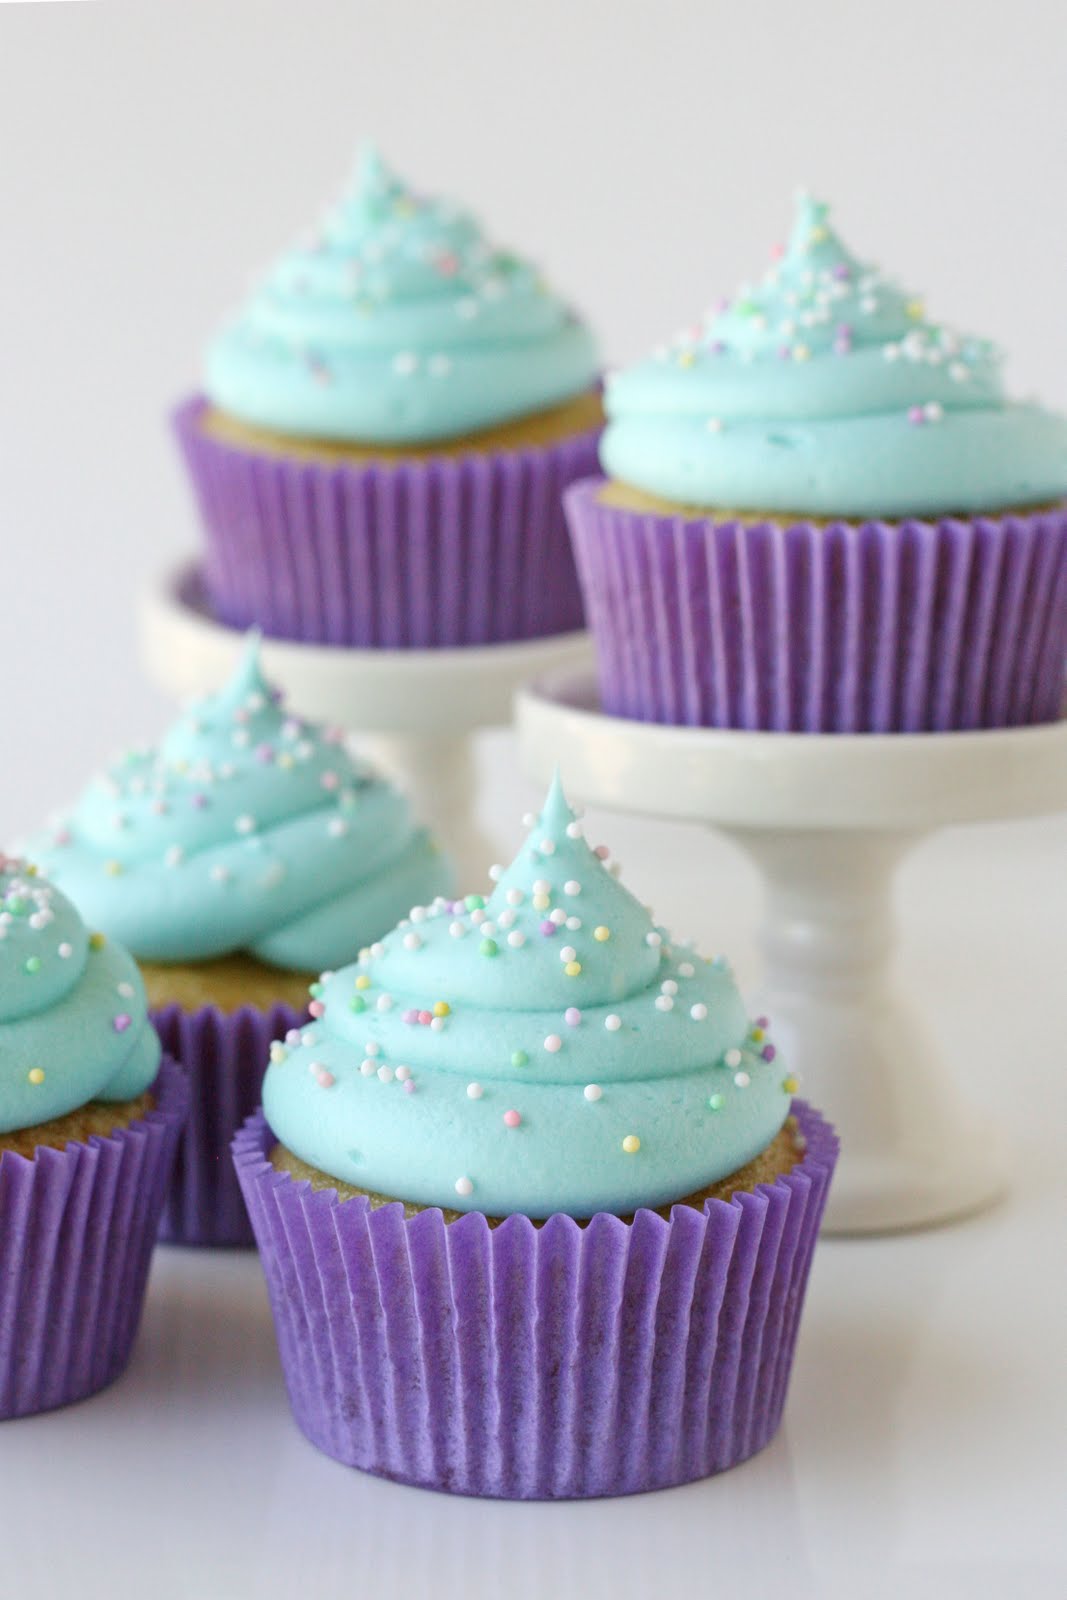 Cupcakes frosting buttercream to on how top  my of favorite classic   or frosting make this Vanilla Try